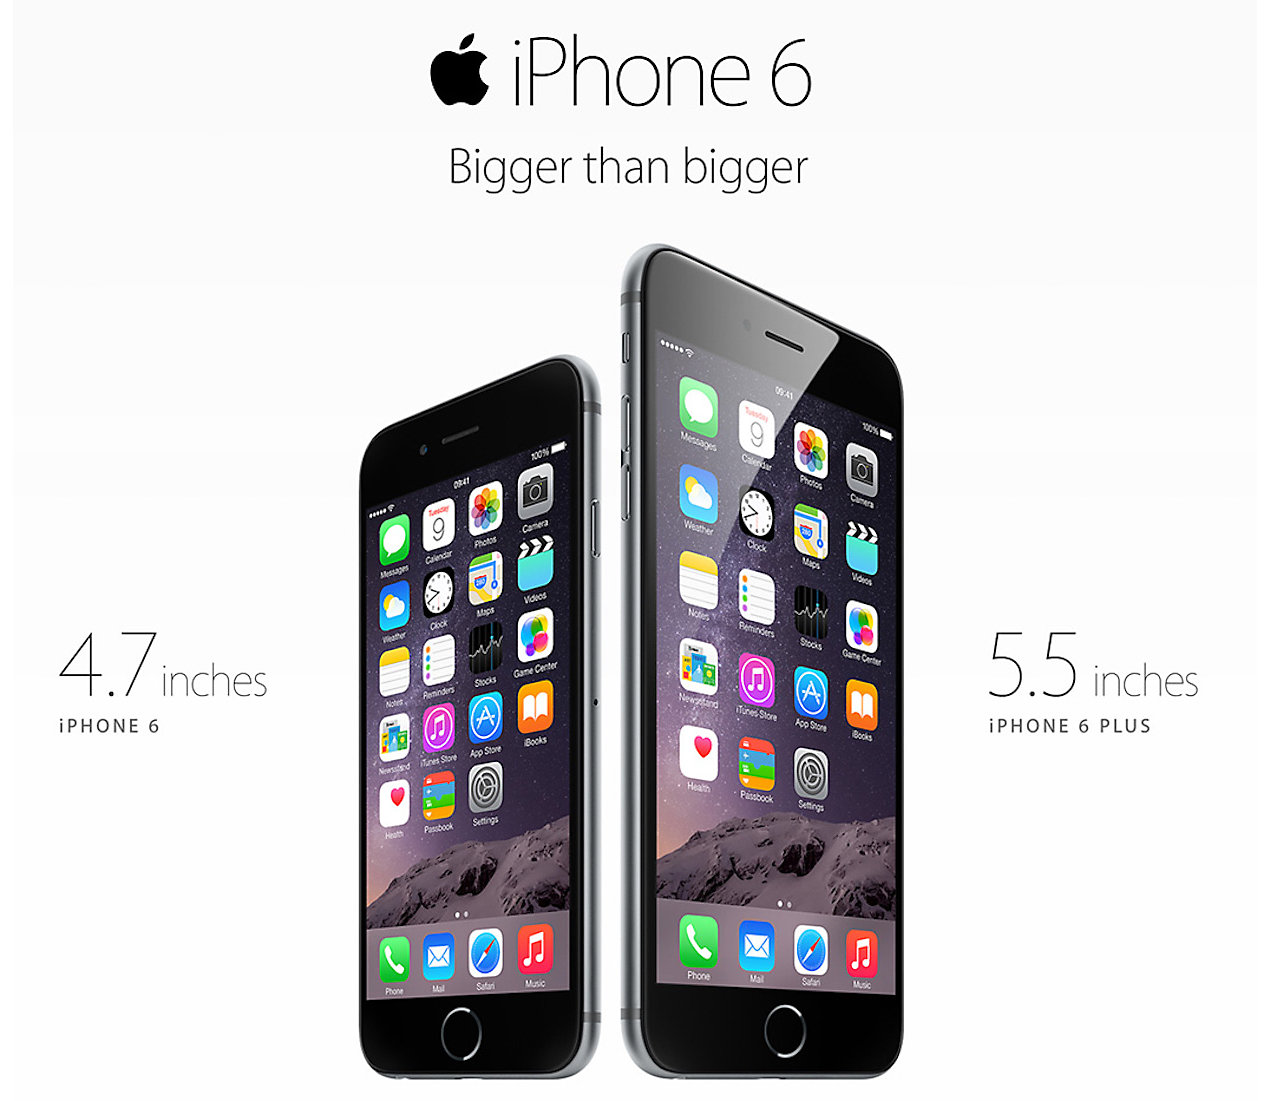 apple iphone6 hero cc003 US Lawmakers Demand Answers For iPhone Slowdown